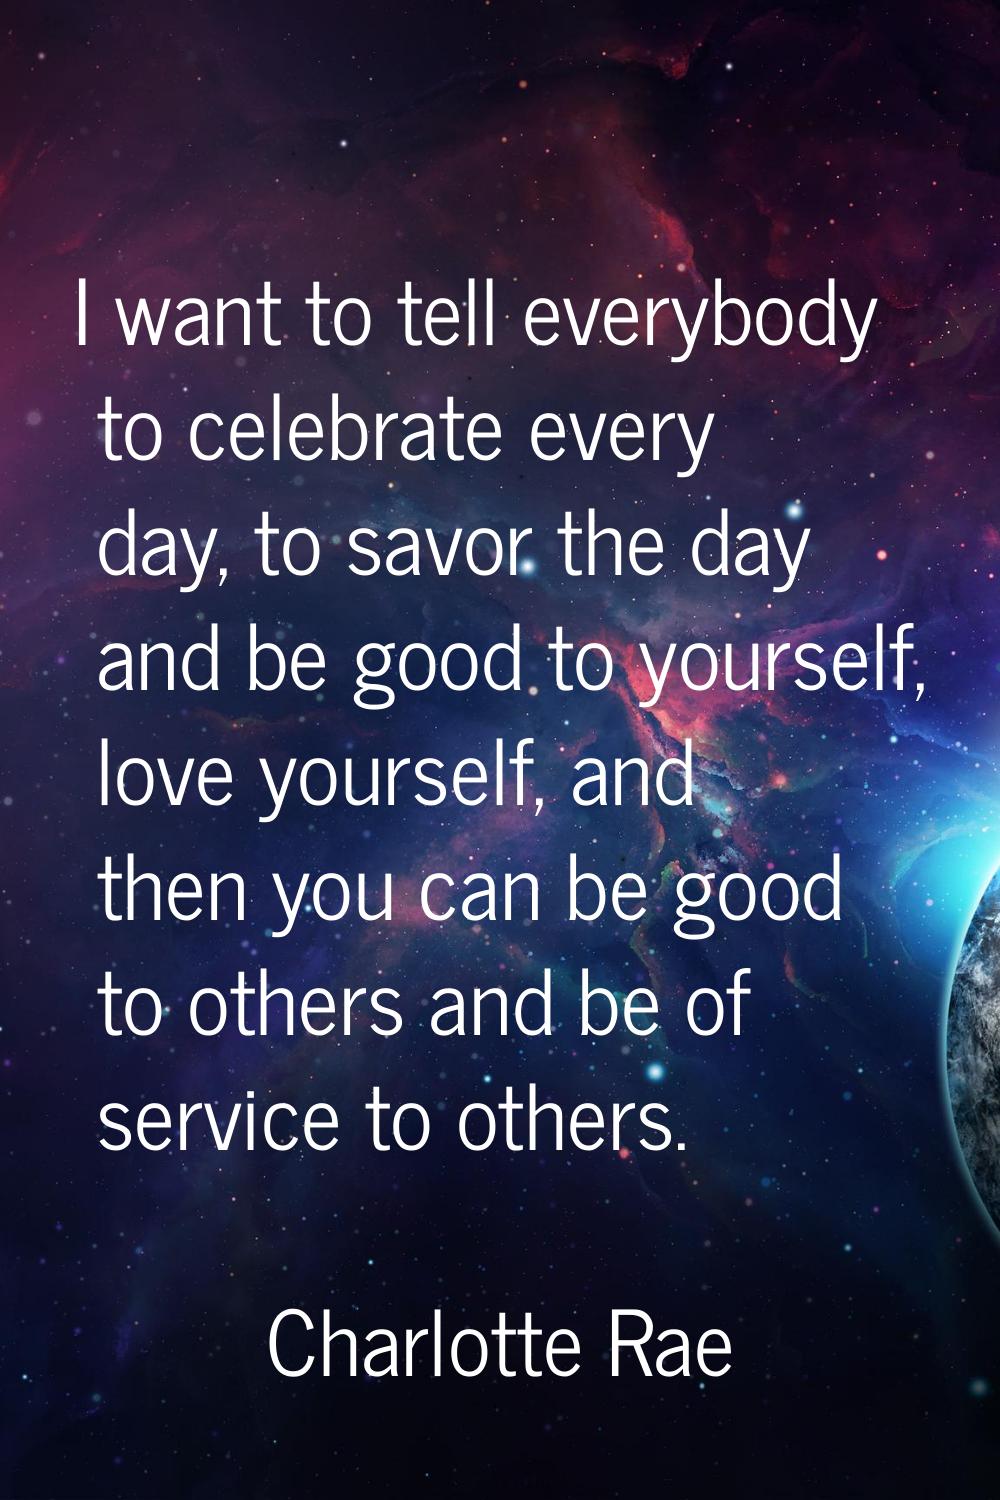 I want to tell everybody to celebrate every day, to savor the day and be good to yourself, love you